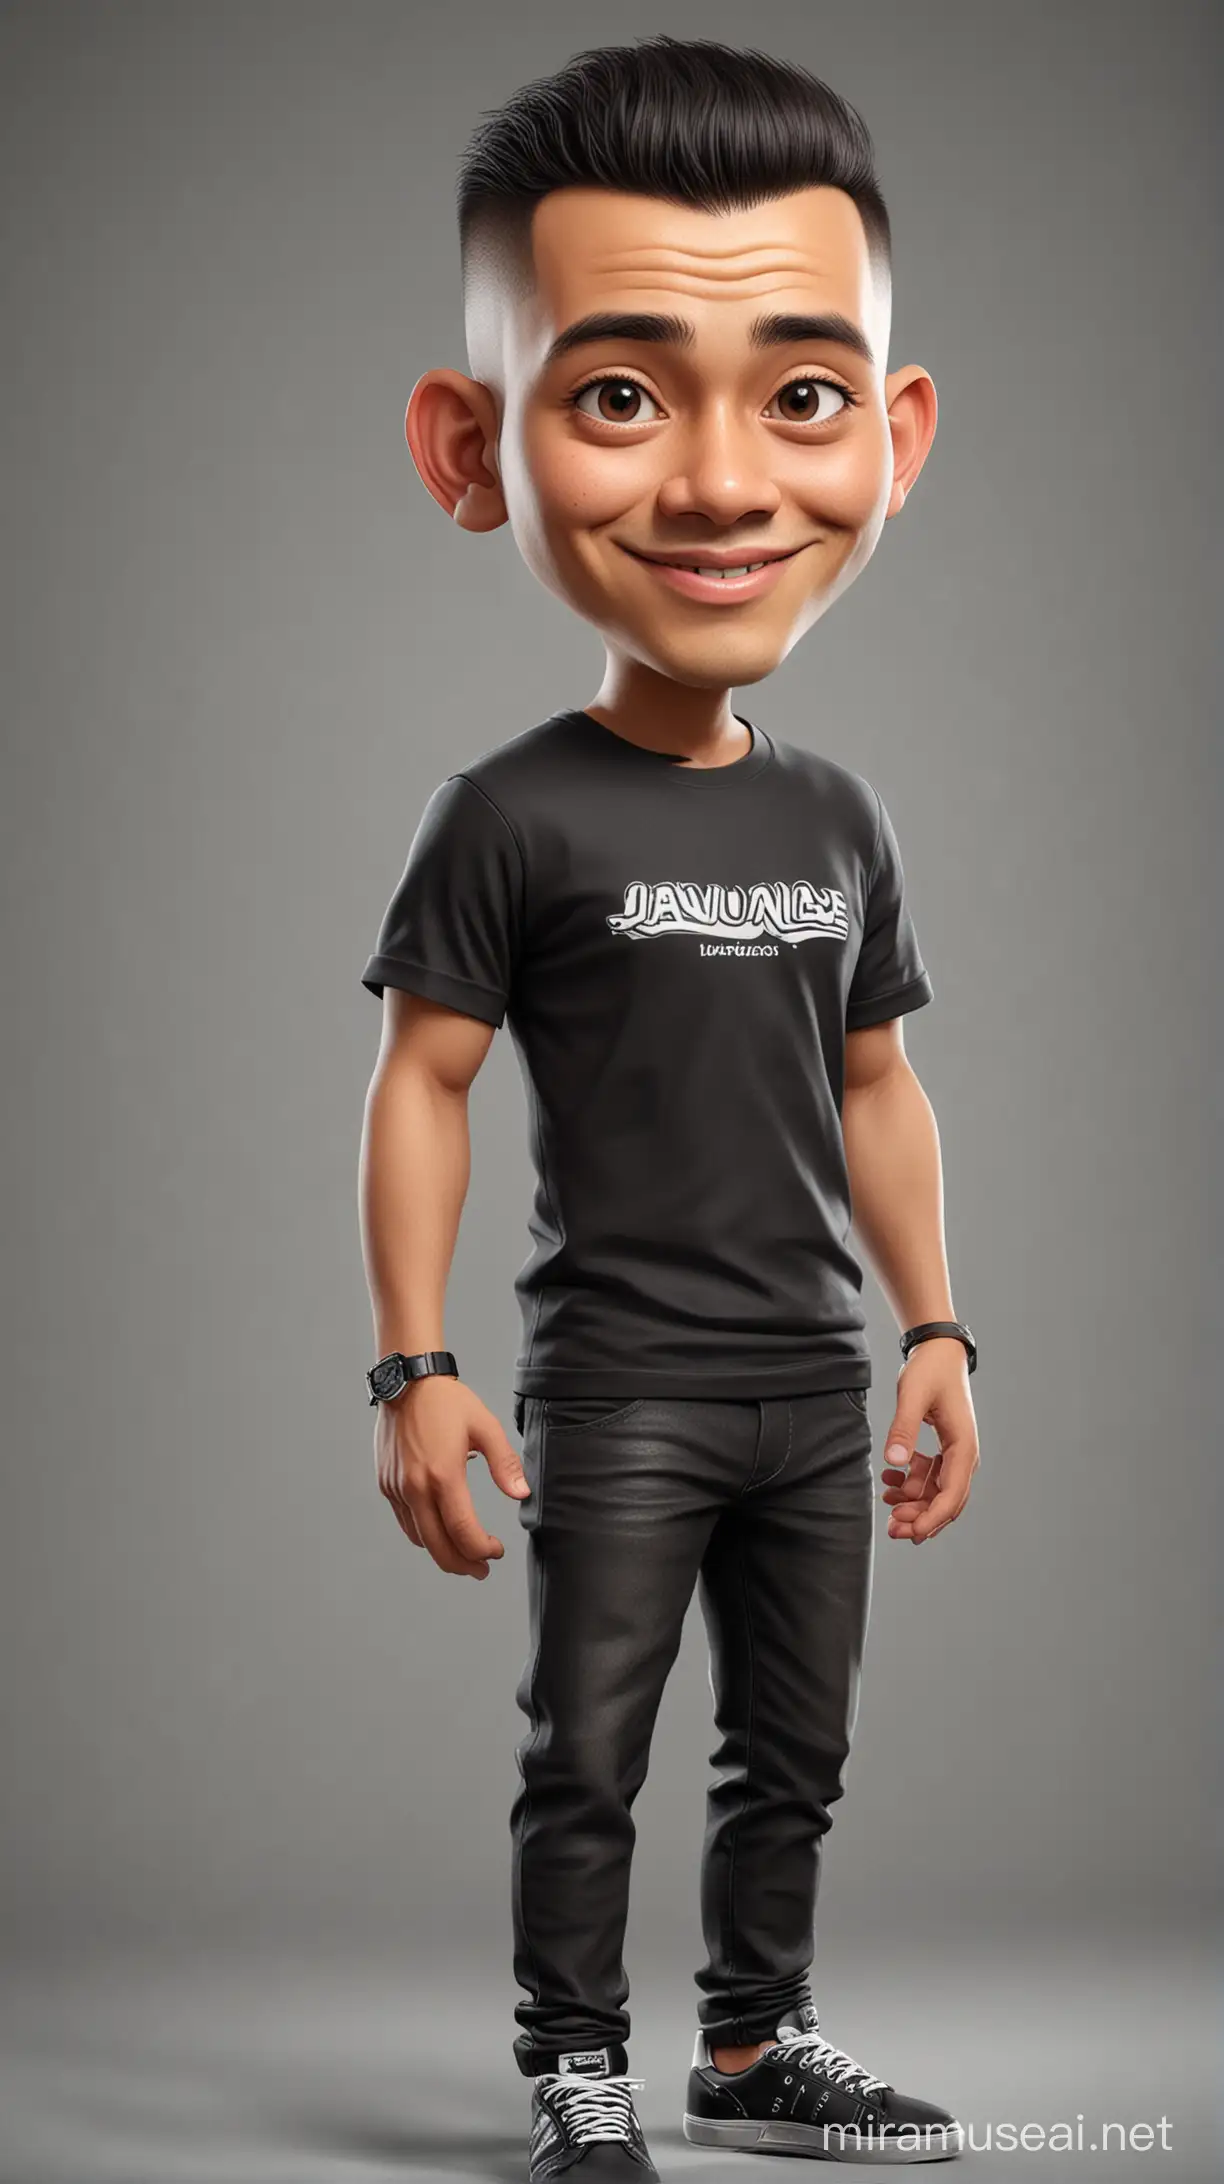 Caricature of a Javanese cute man with normal face,black t-shirt, crew buzz cut, innocent pose, full size body in photoshoot session, caricature character 